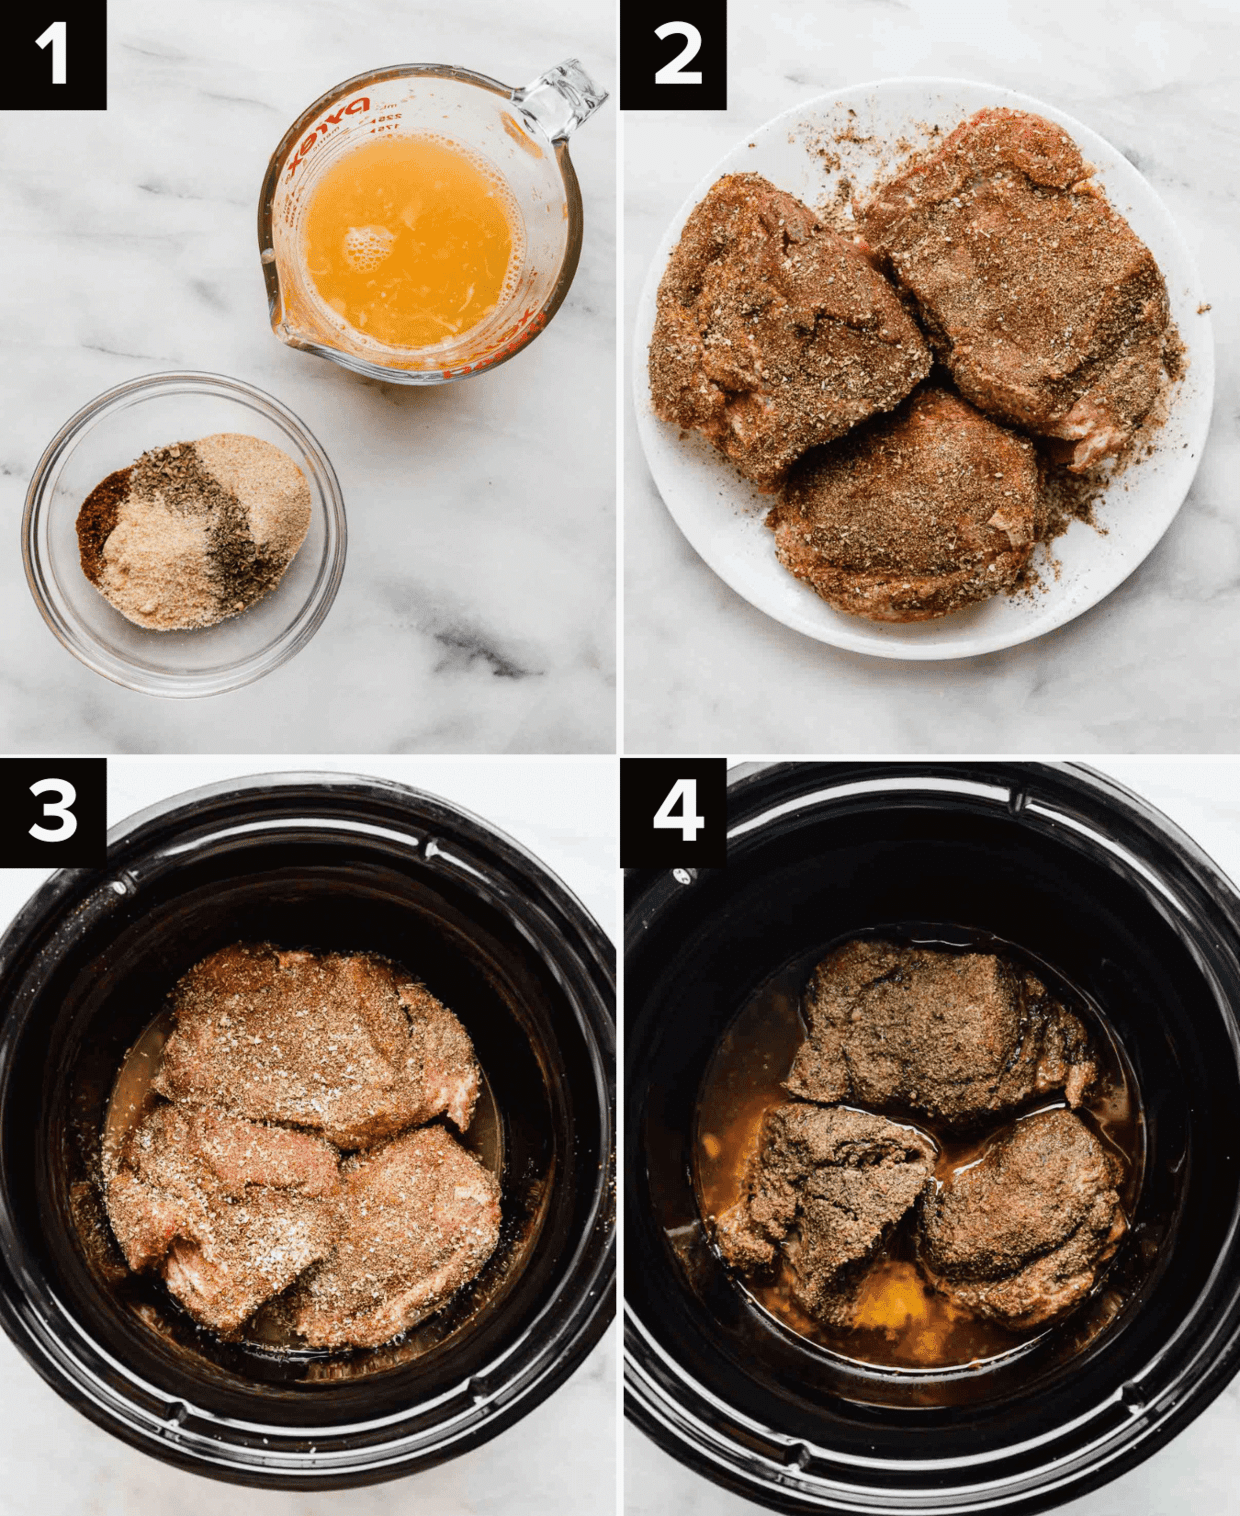 Four photos showing the process of how to make pork carnitas, top left image is a glass bowl of seasonings and a bowl of orange juice on white background, top right is raw pork shoulder with seasoning rubbed on it, bottom left photo is raw seasoned pork in a black slow cooker, bottom right photo is juicy pork shoulder in a slow cooker.